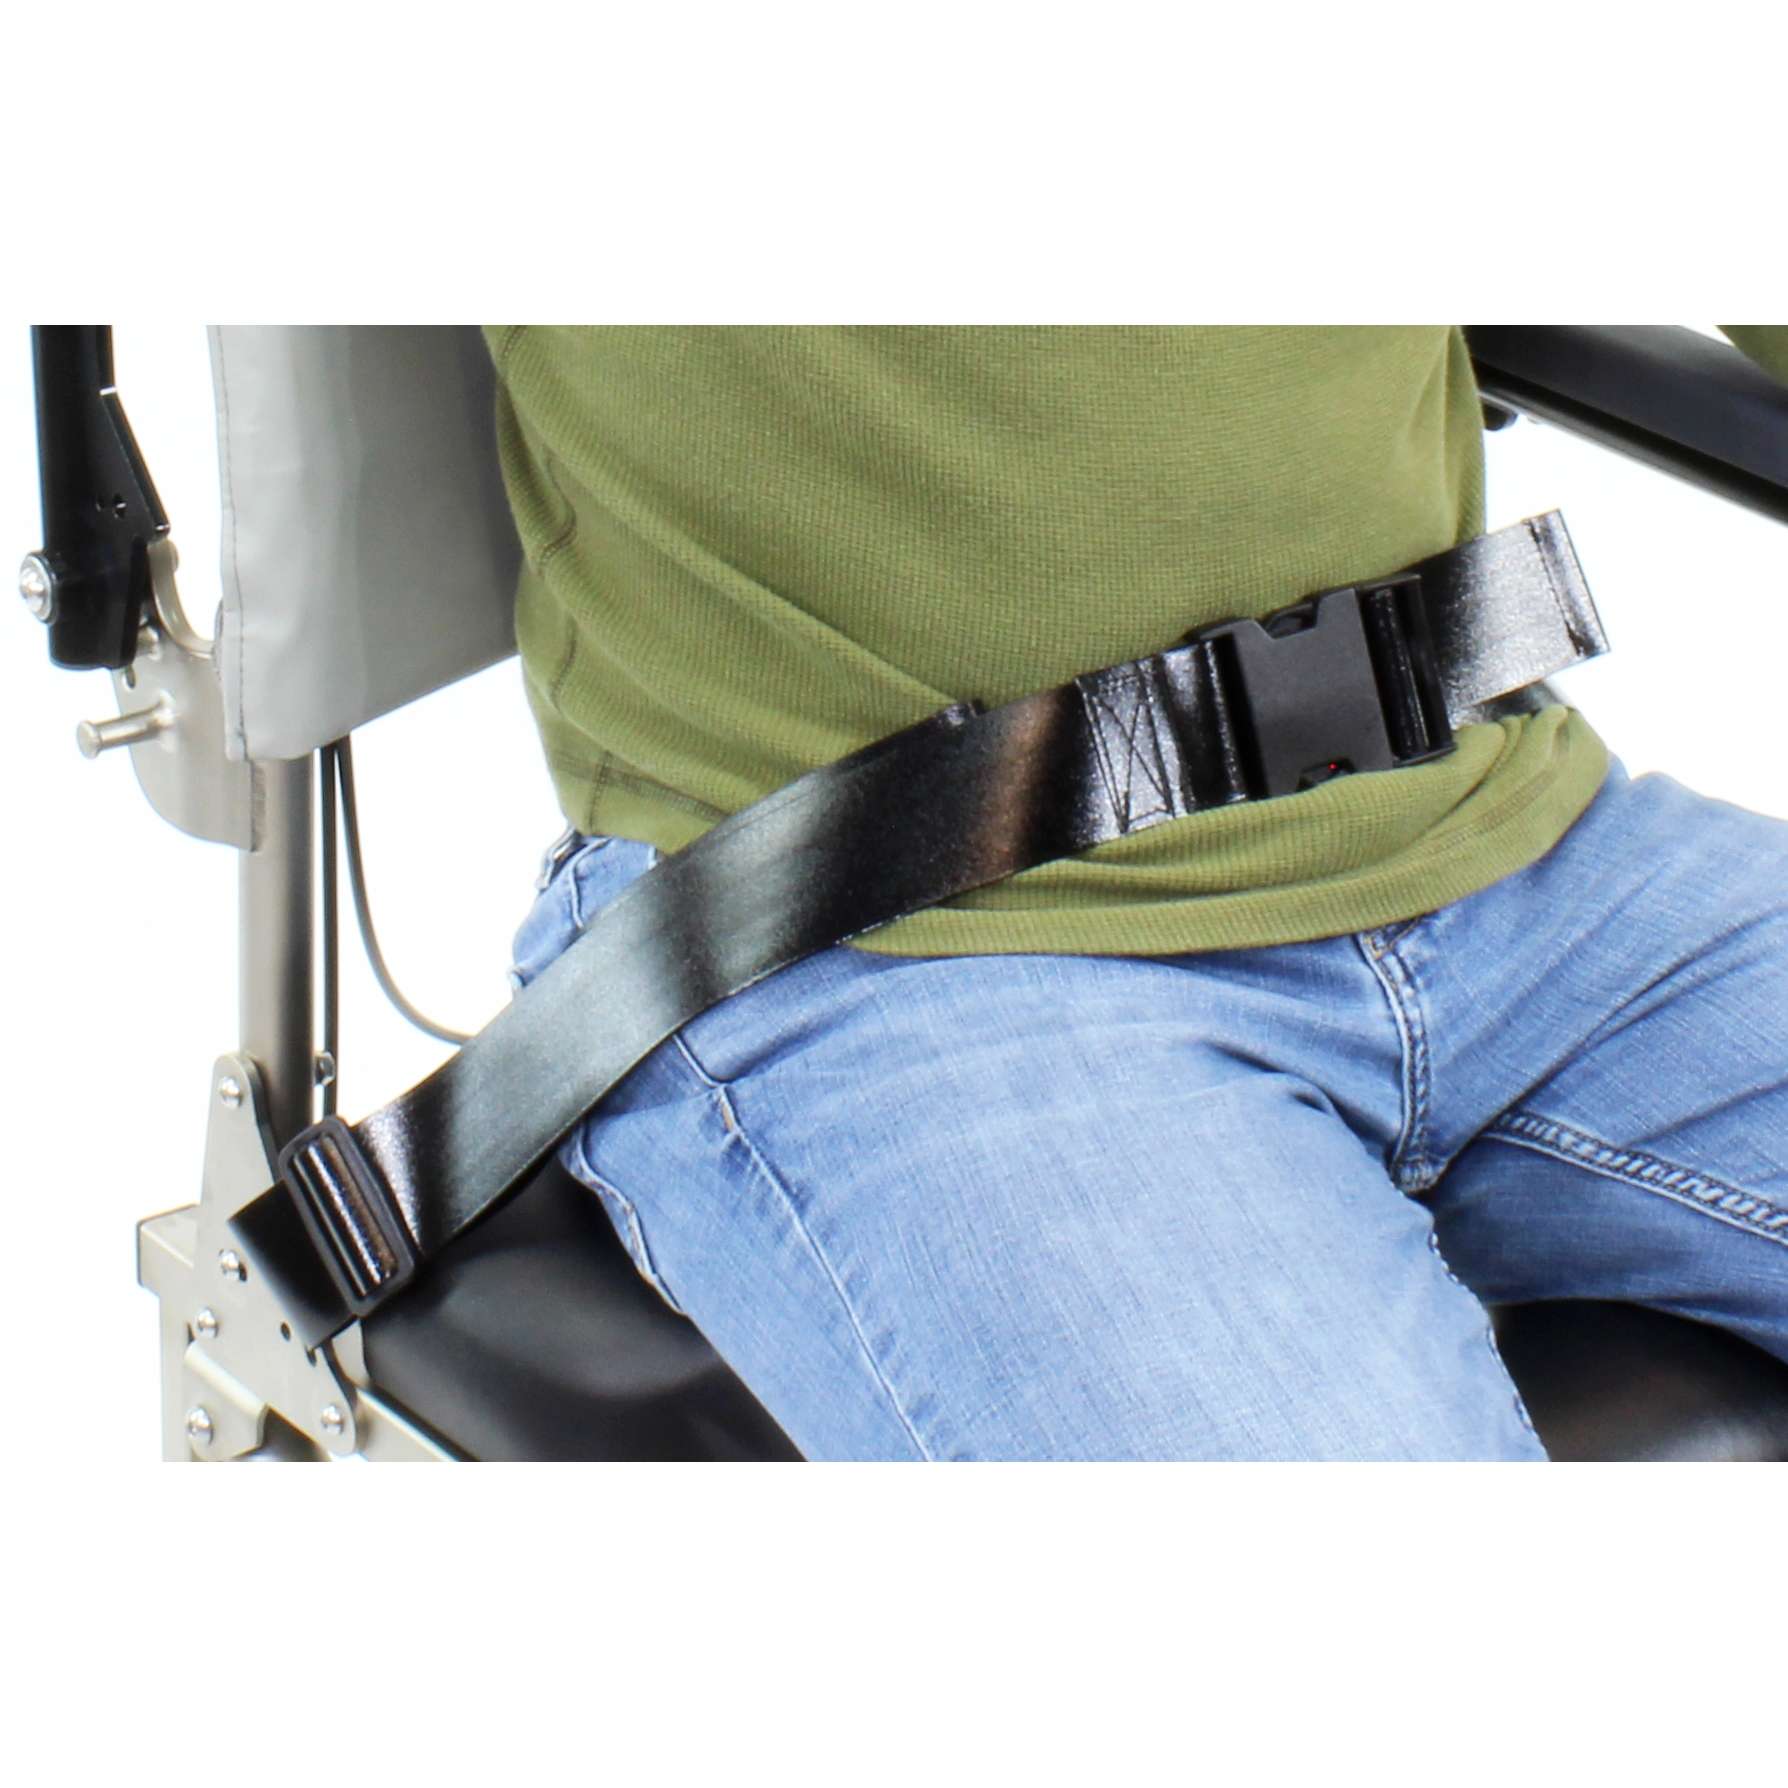 Infection Control Pelvic Belt - Extra Large (2 piece with side release buckle) (for 22" - 30" seat frame widths) (ZPBICXL)